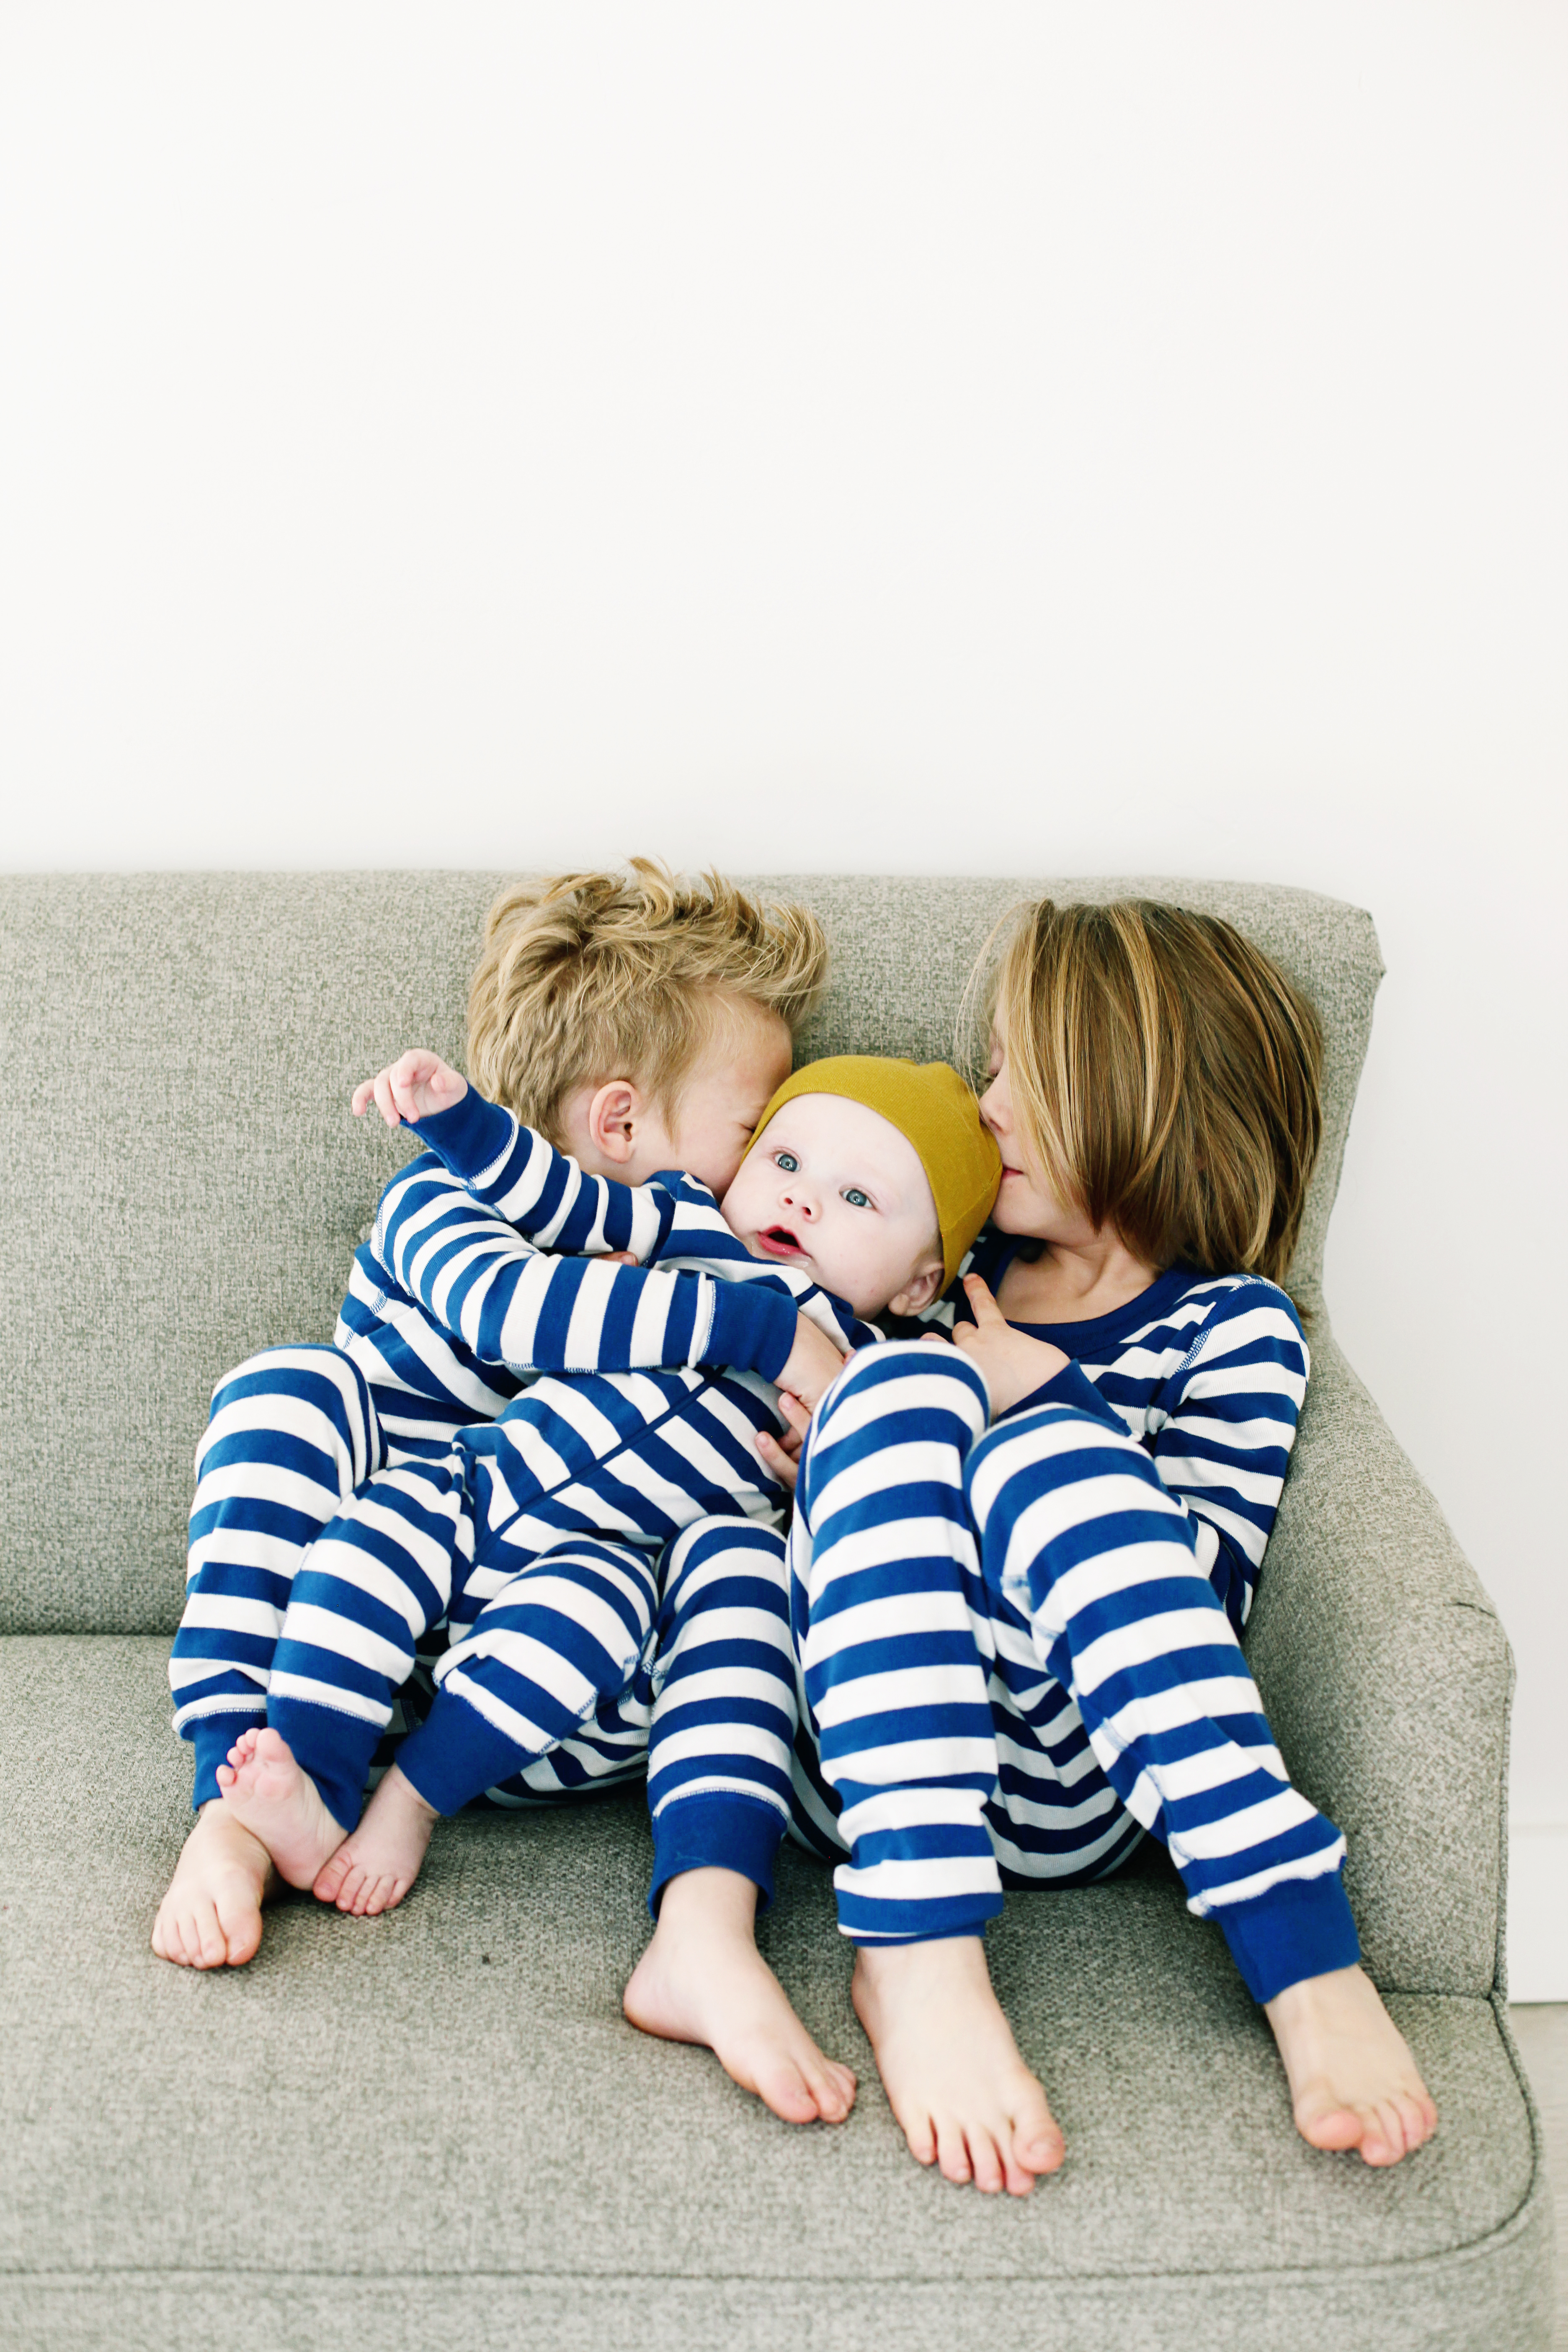 New Jams in our Family Jams: The Coolest Family Pajamas by Ginger Parrish of The Parrish Place